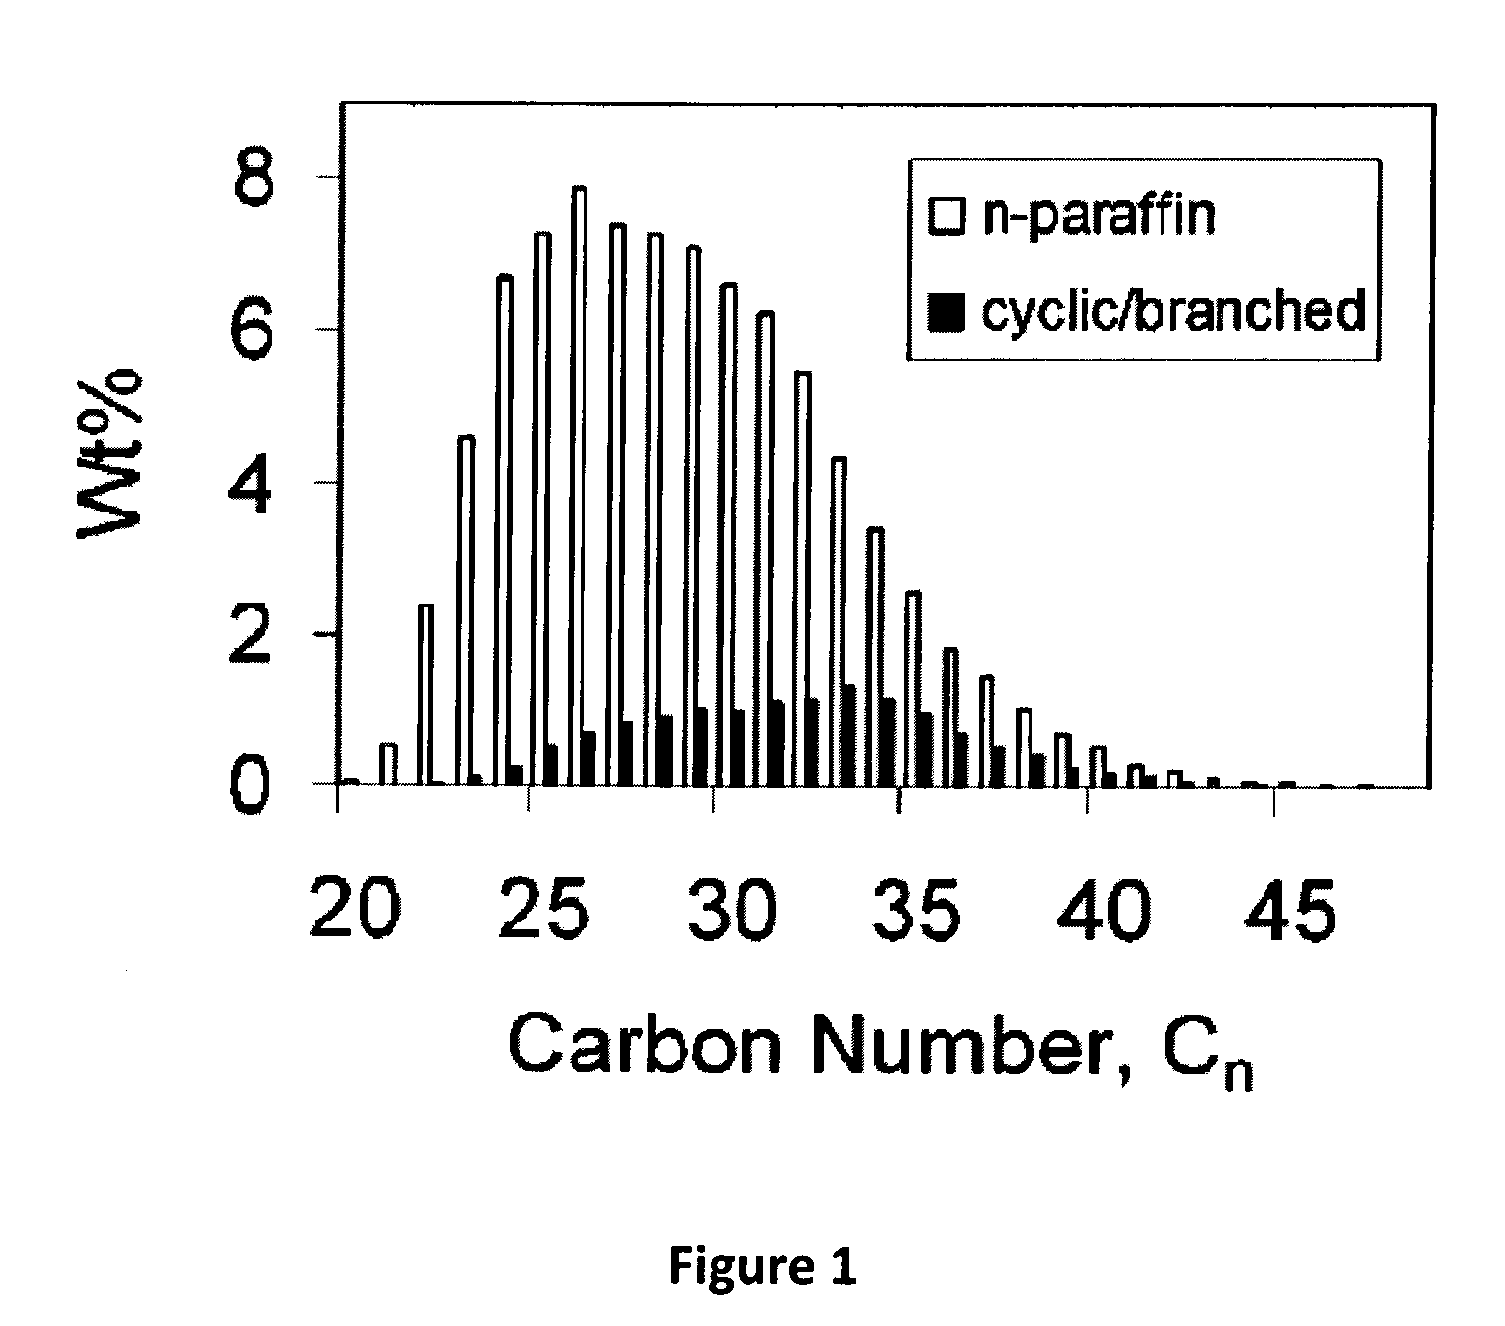 Methods for Testing the Effect of Polymer Additives on Wax Deposition from Crude Oils and Reducing Wax Deposition from Crude Oil During Pipeline Transmission